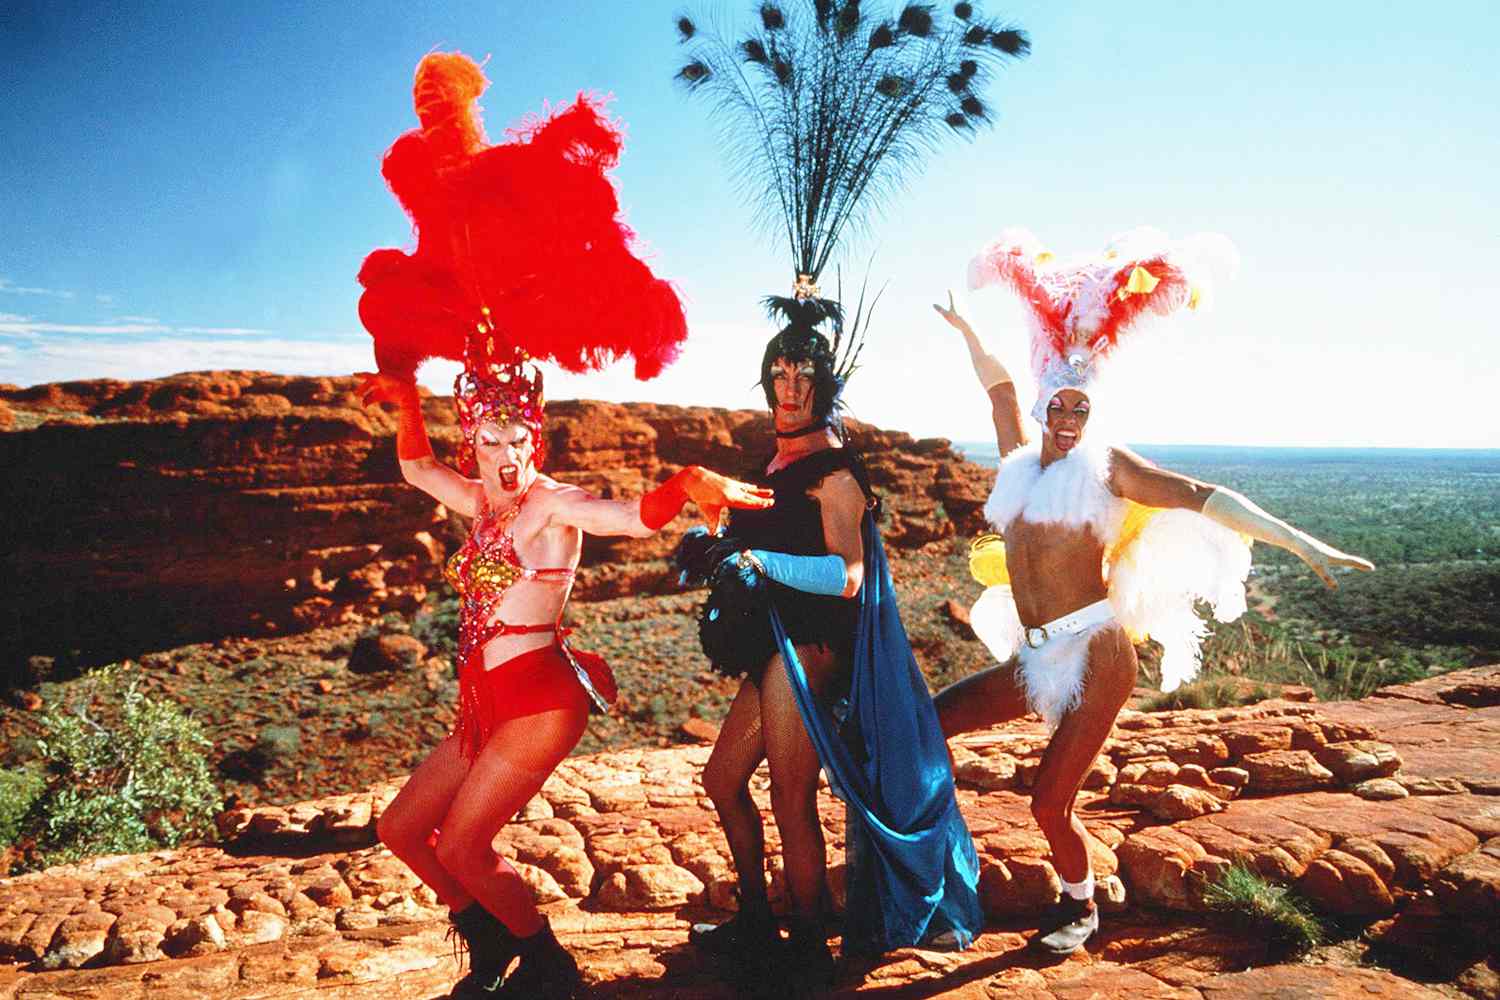 Terence Stamp, Guy Pearce, and Hugo Weaving perform in Priscilla, Queen of the Desert